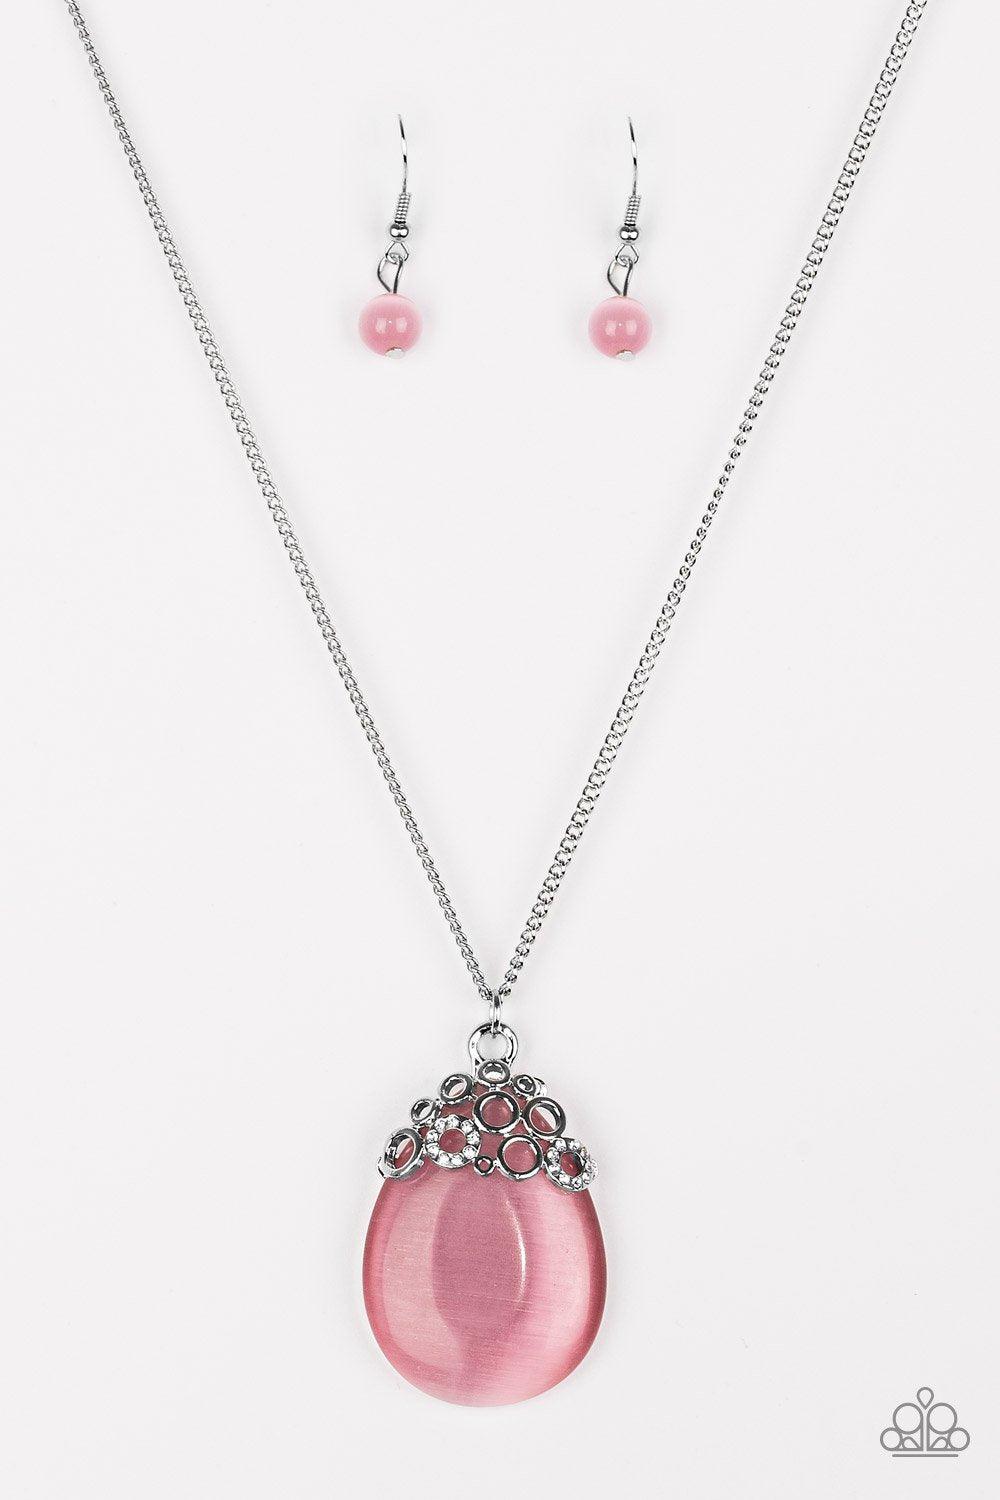 Nightcap And Gown Pink Moonstone Necklace - Paparazzi Accessories-CarasShop.com - $5 Jewelry by Cara Jewels